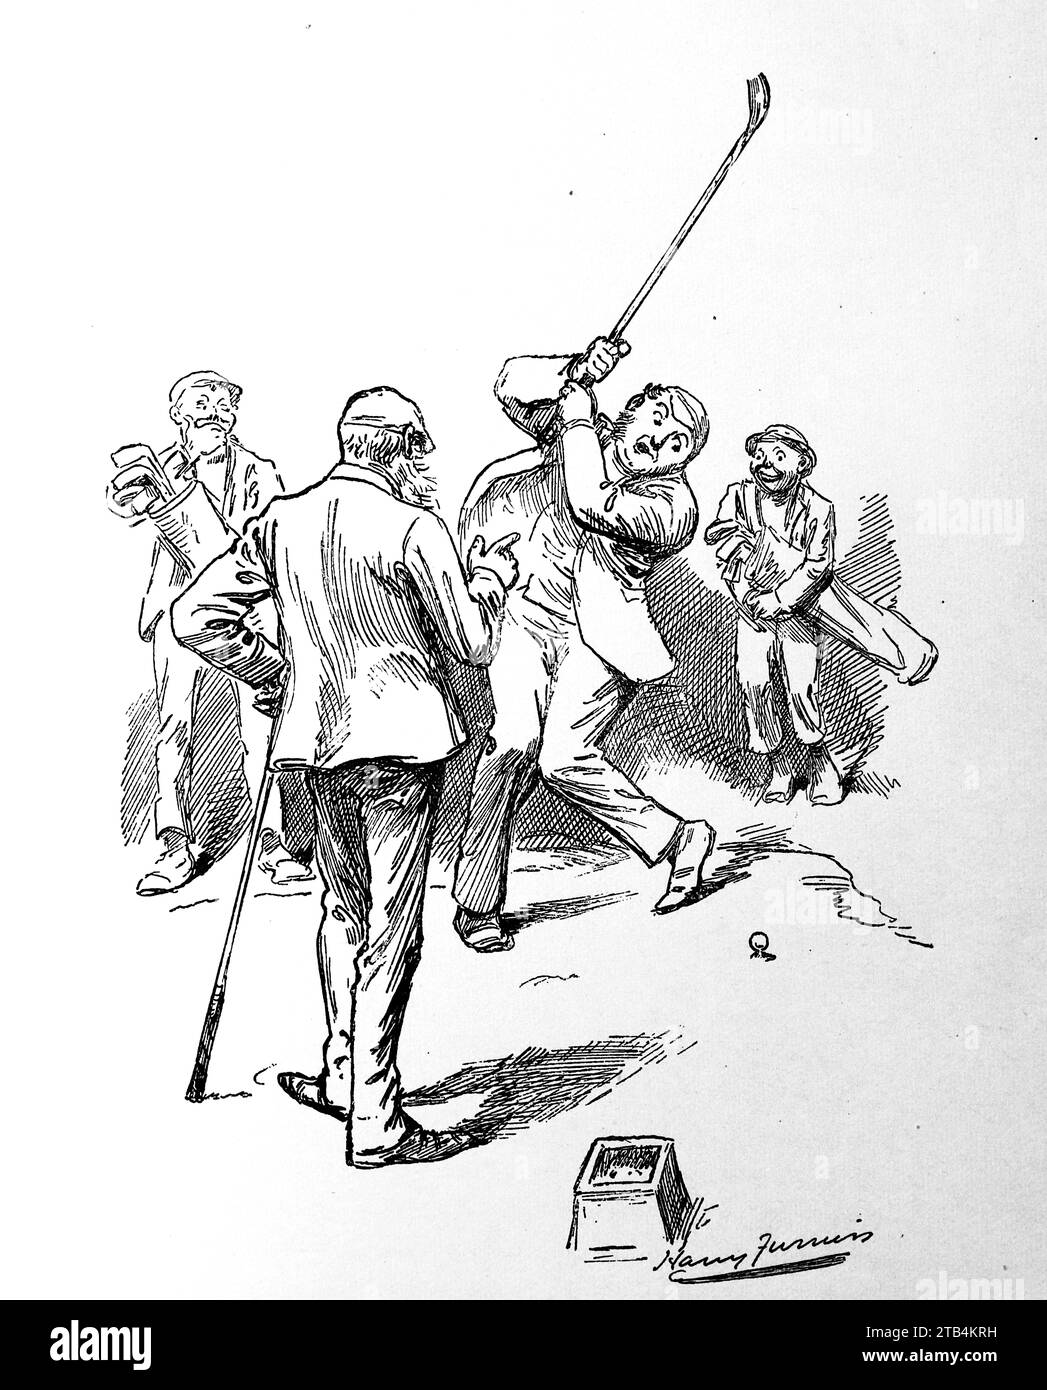 The “Headsman” Style, by H. Furniss. From an illustration about golf, dating from 1889 to 1901. The history of golf is a long one. Though its origins are disputed, historians are generally agreed that what is known as “modern” golf began in the Middle Ages in Scotland. It was not until the mid to late nineteenth century that this sport became more popular in wider Britain, the British Empire and then the United States. Over the years the humble golf ball and golf club have changed vastly. Stock Photo